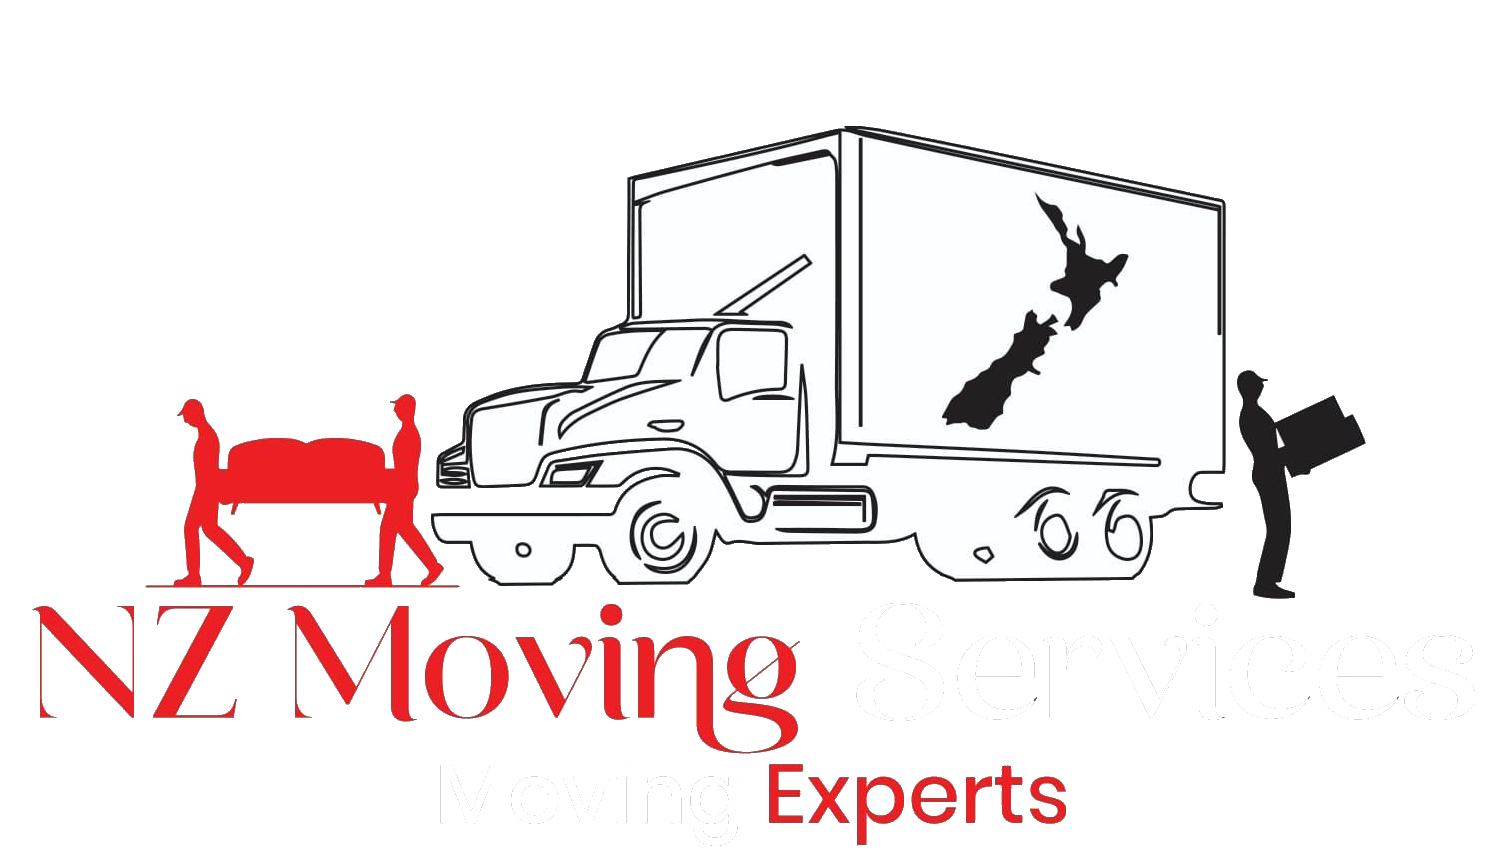 Book online Best Movers In Christchurch / Affordable Nz Moving Services ChCh